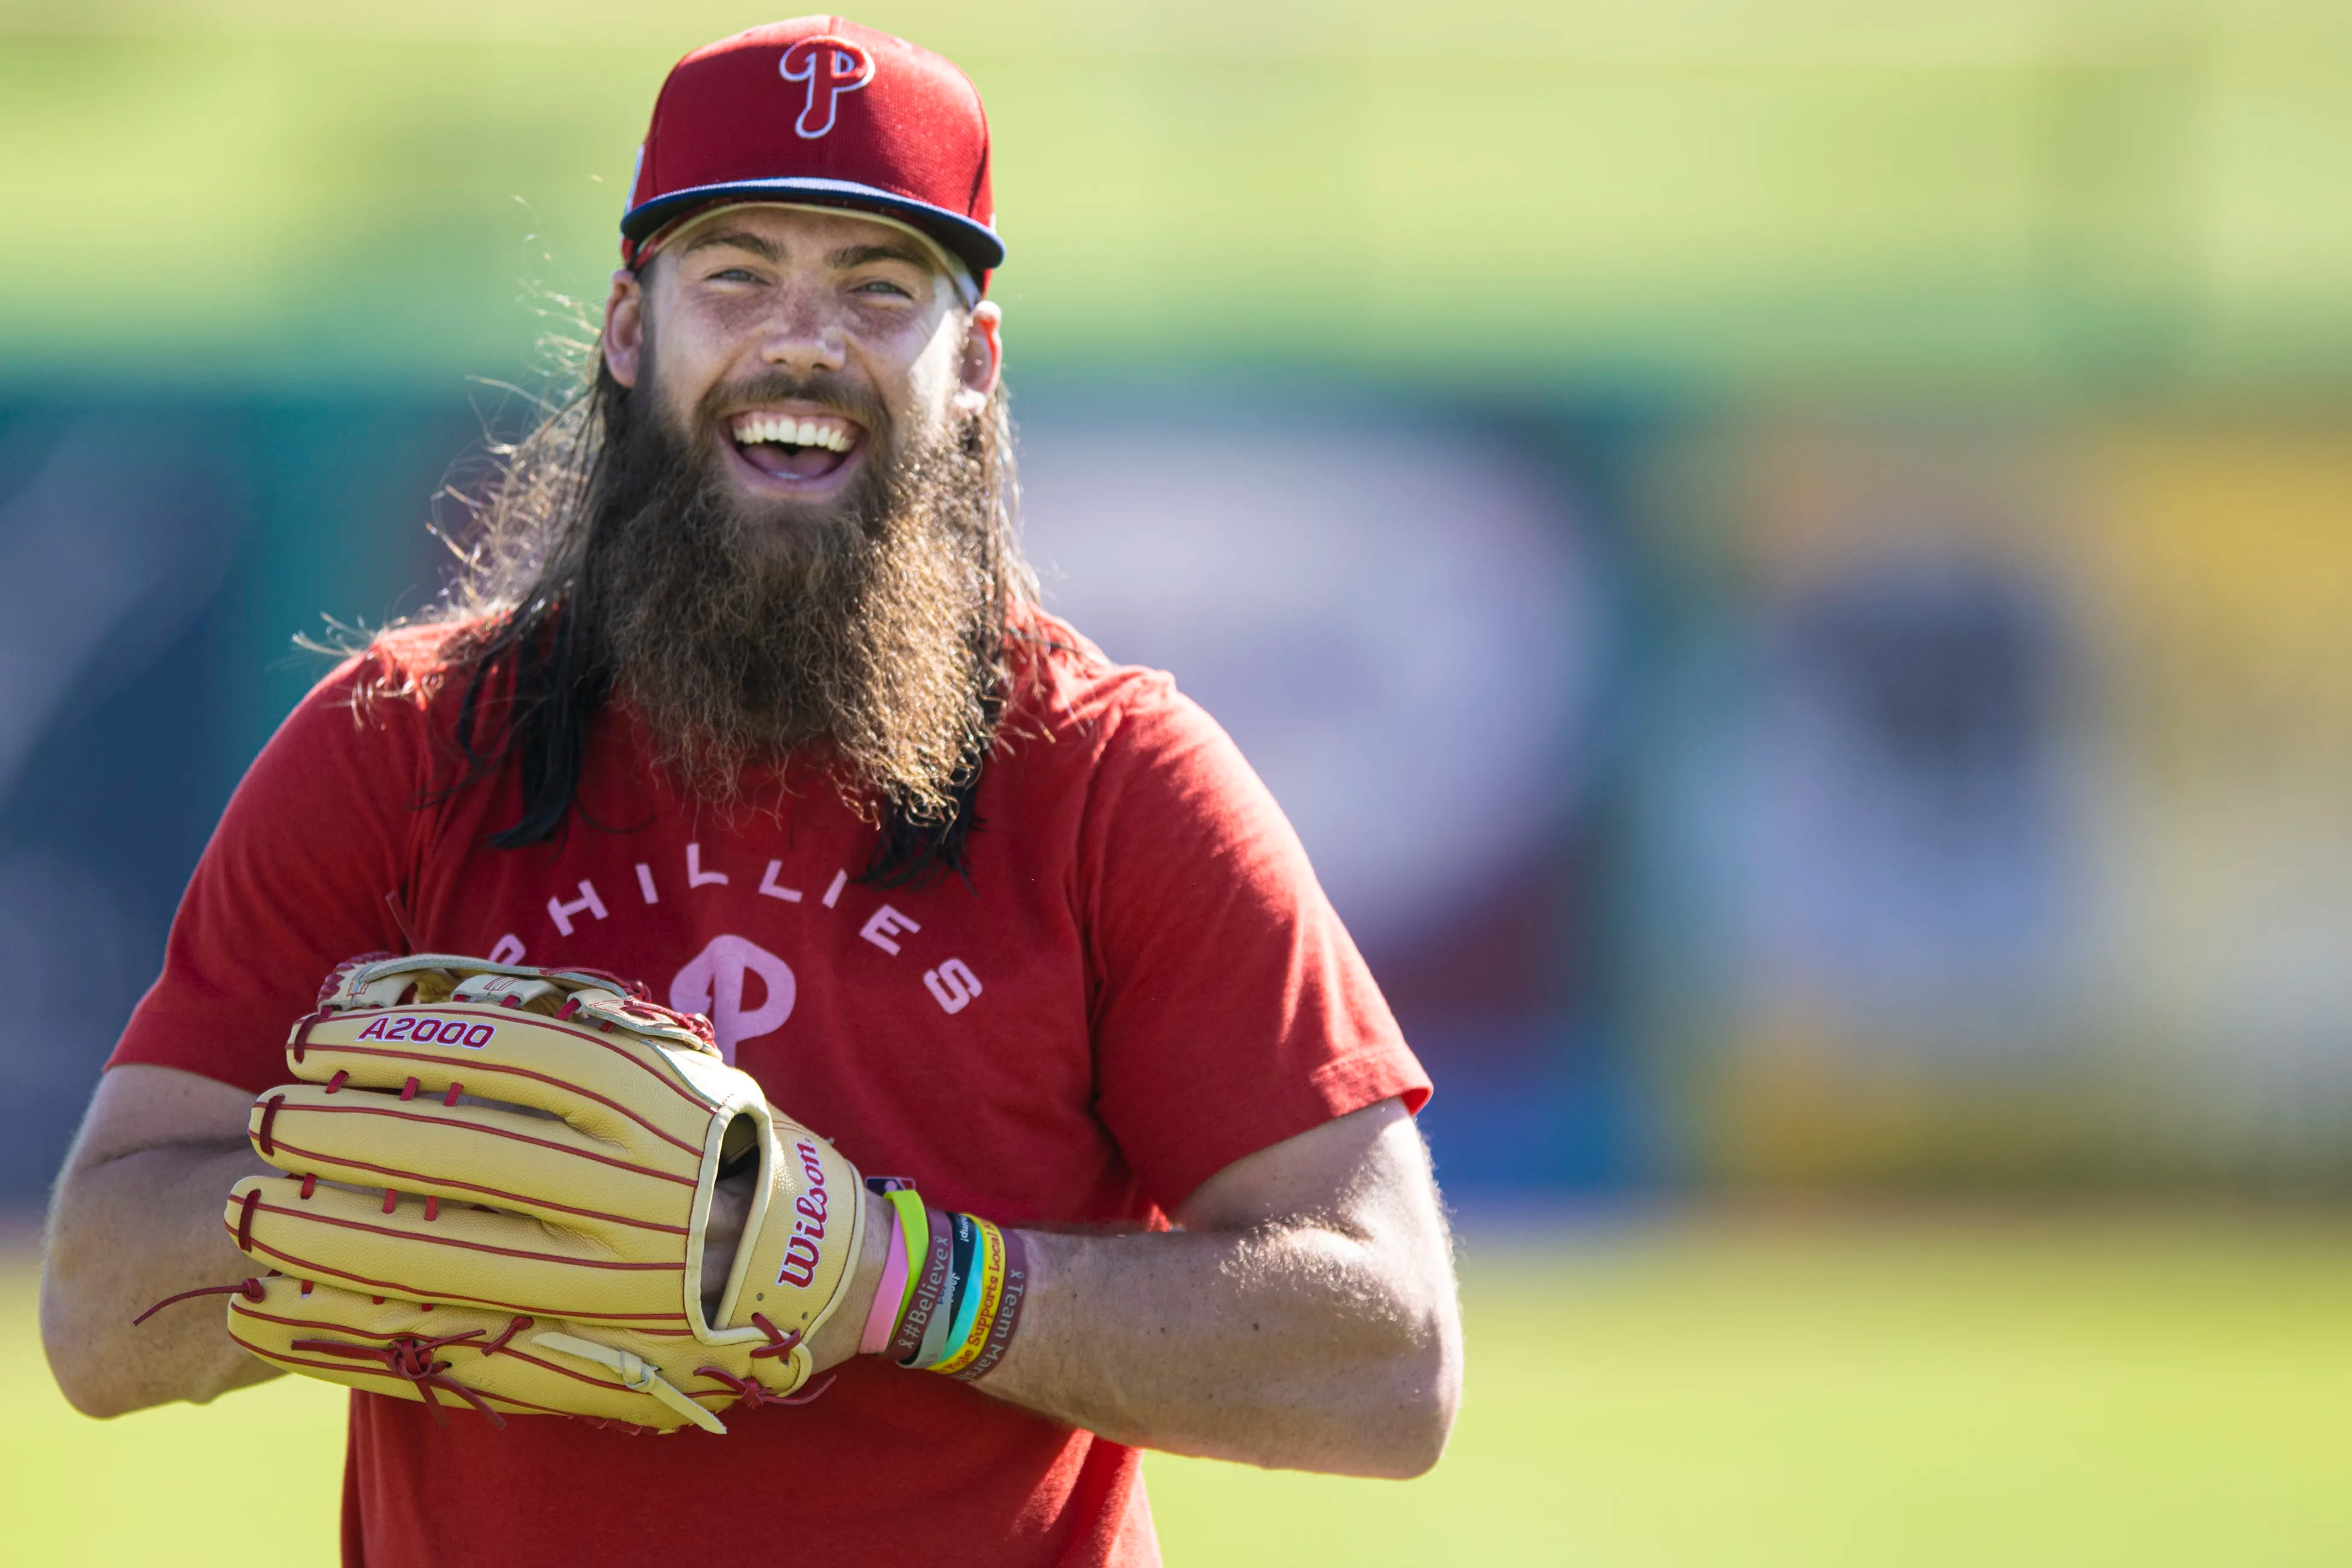 PICTURES: Phillies spring training – The Morning Call